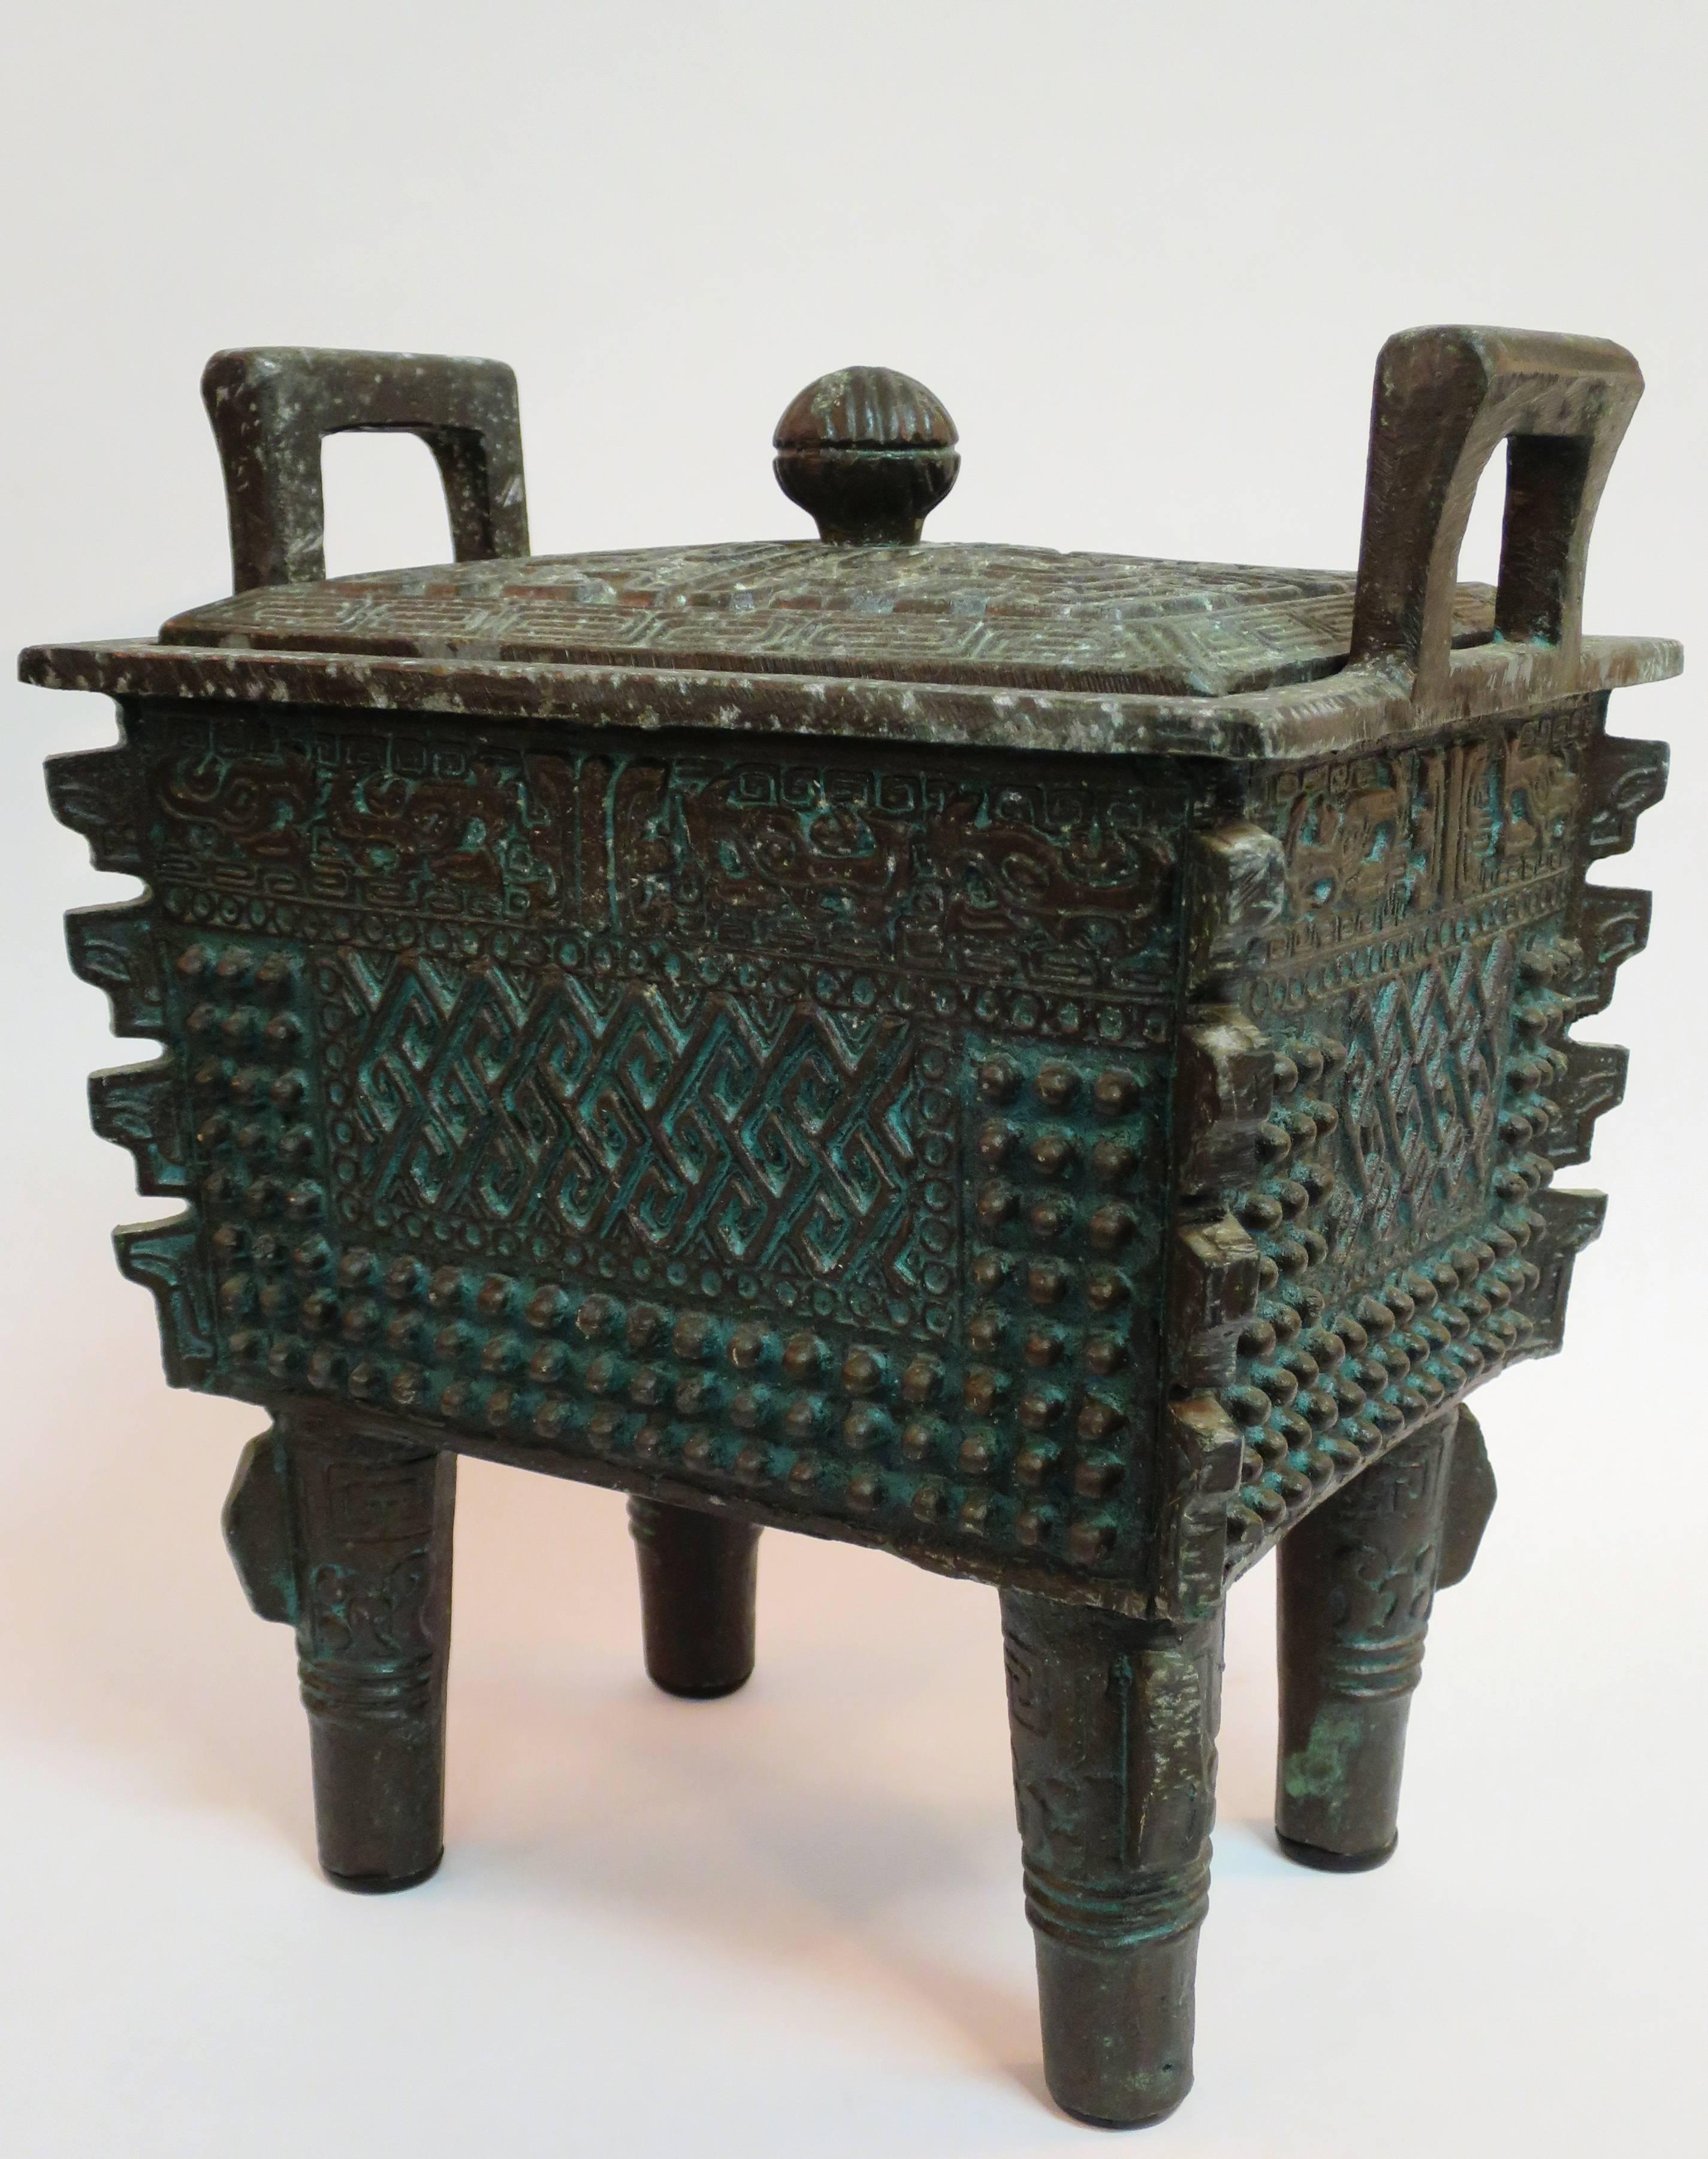 Cast Mayan Motif Ice Bucket in the Manner of James Mont